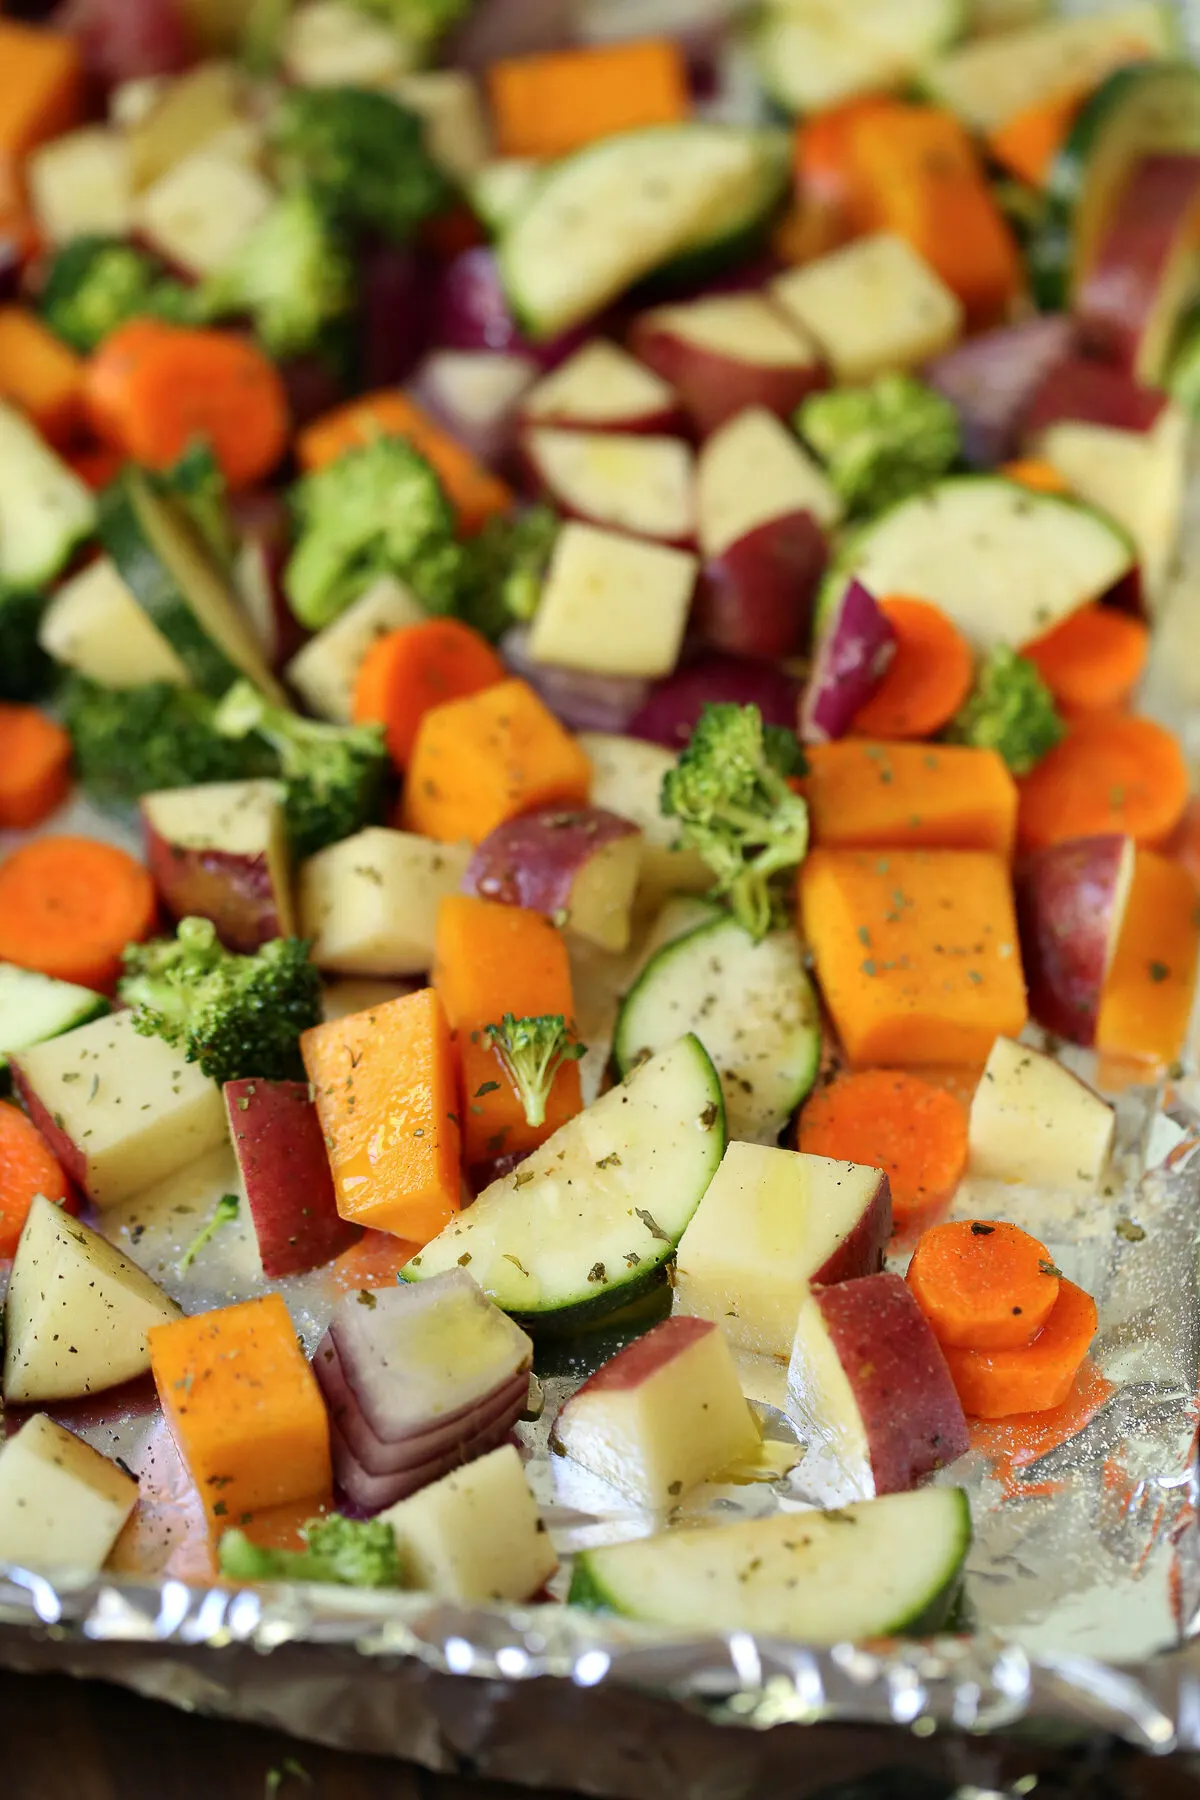 Oven-Roasted Vegetables are a great side dish for any meal, and this recipe is an easy and delicious way to prepare them.